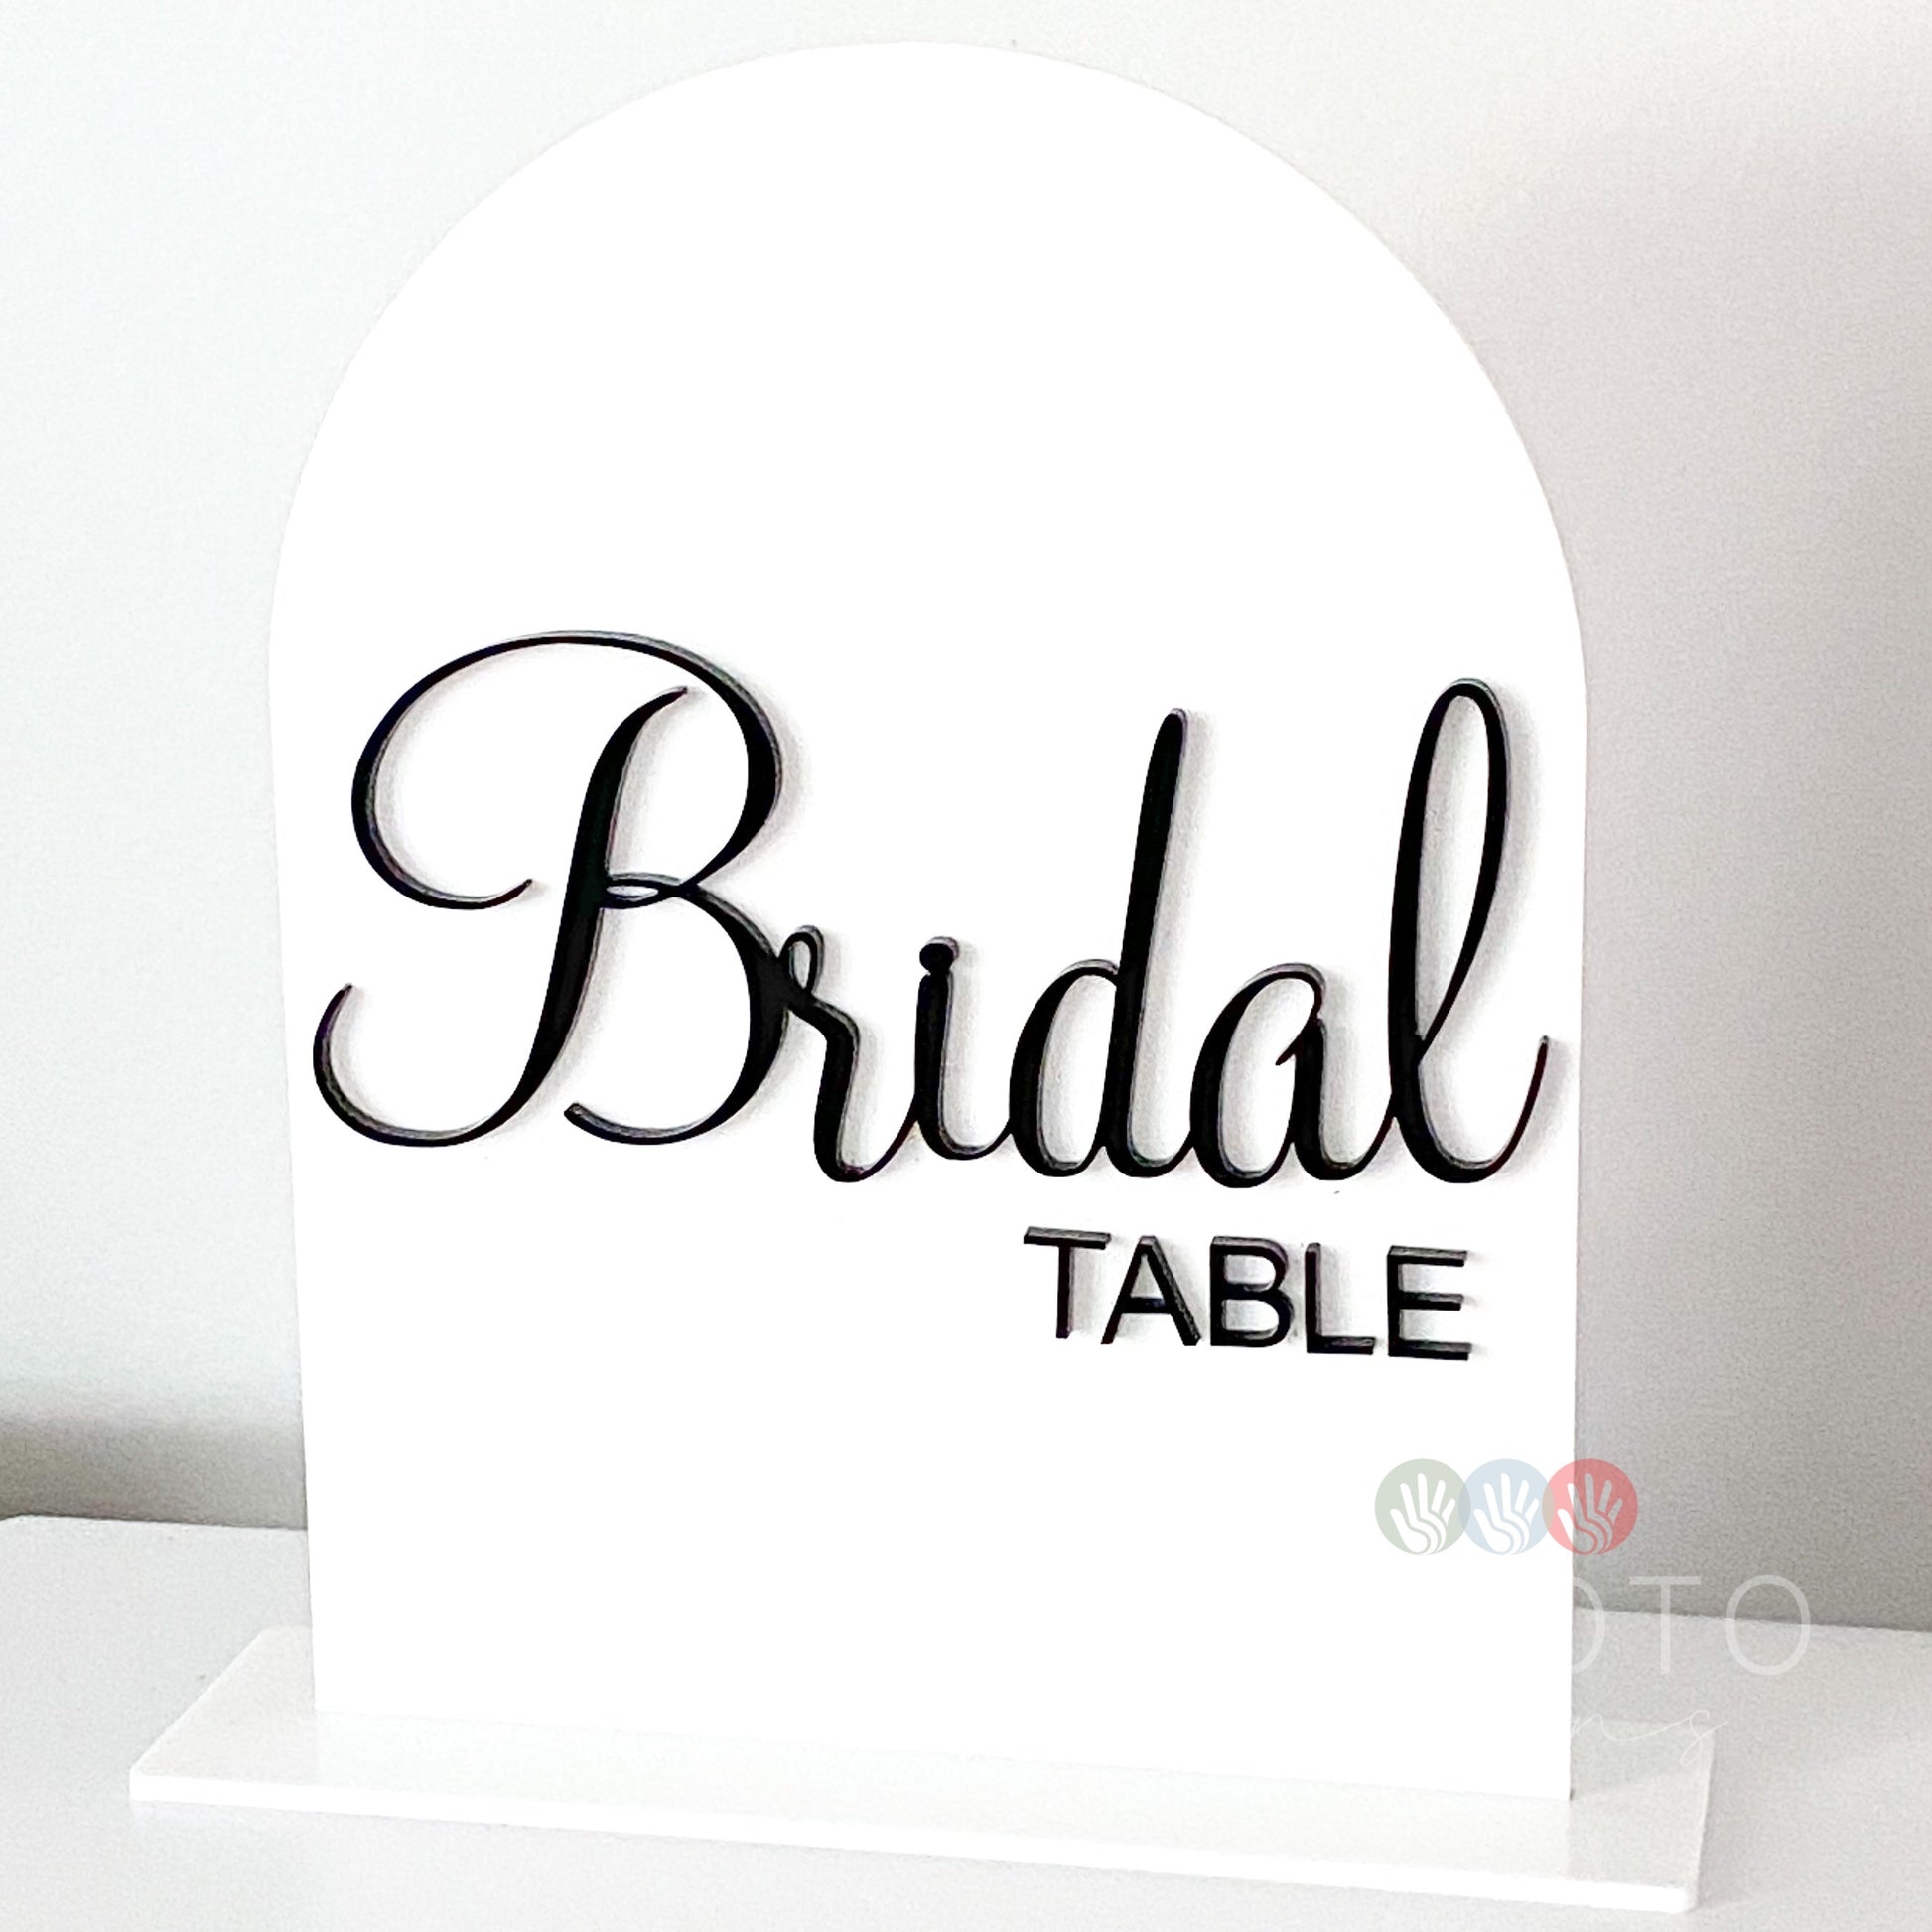 Arch bridal table sign